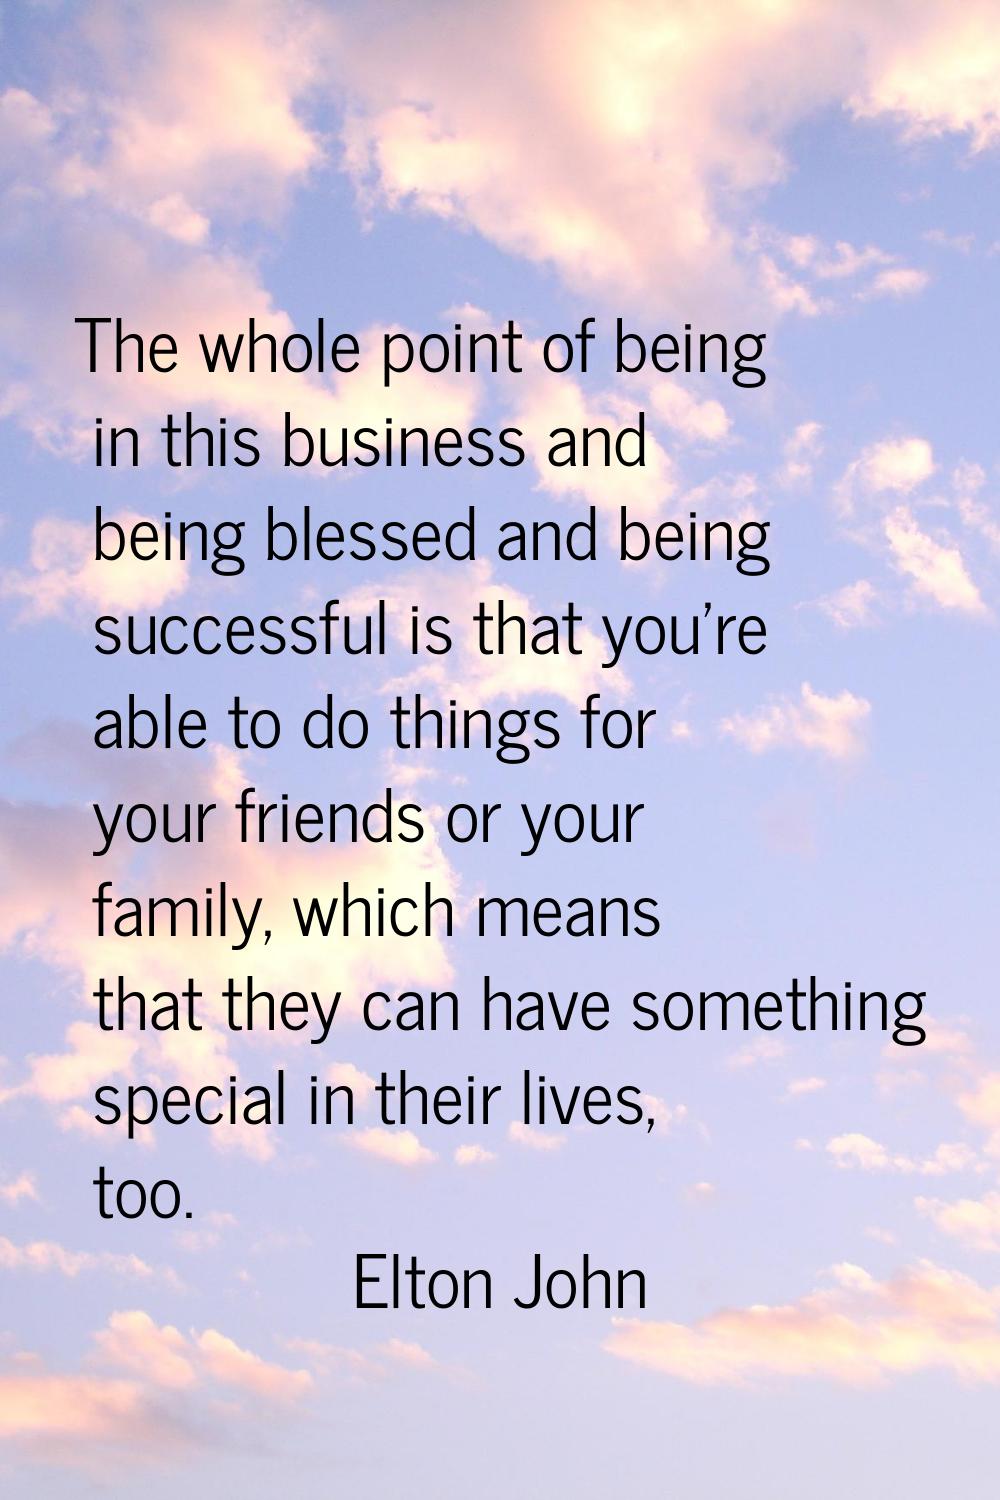 The whole point of being in this business and being blessed and being successful is that you're abl